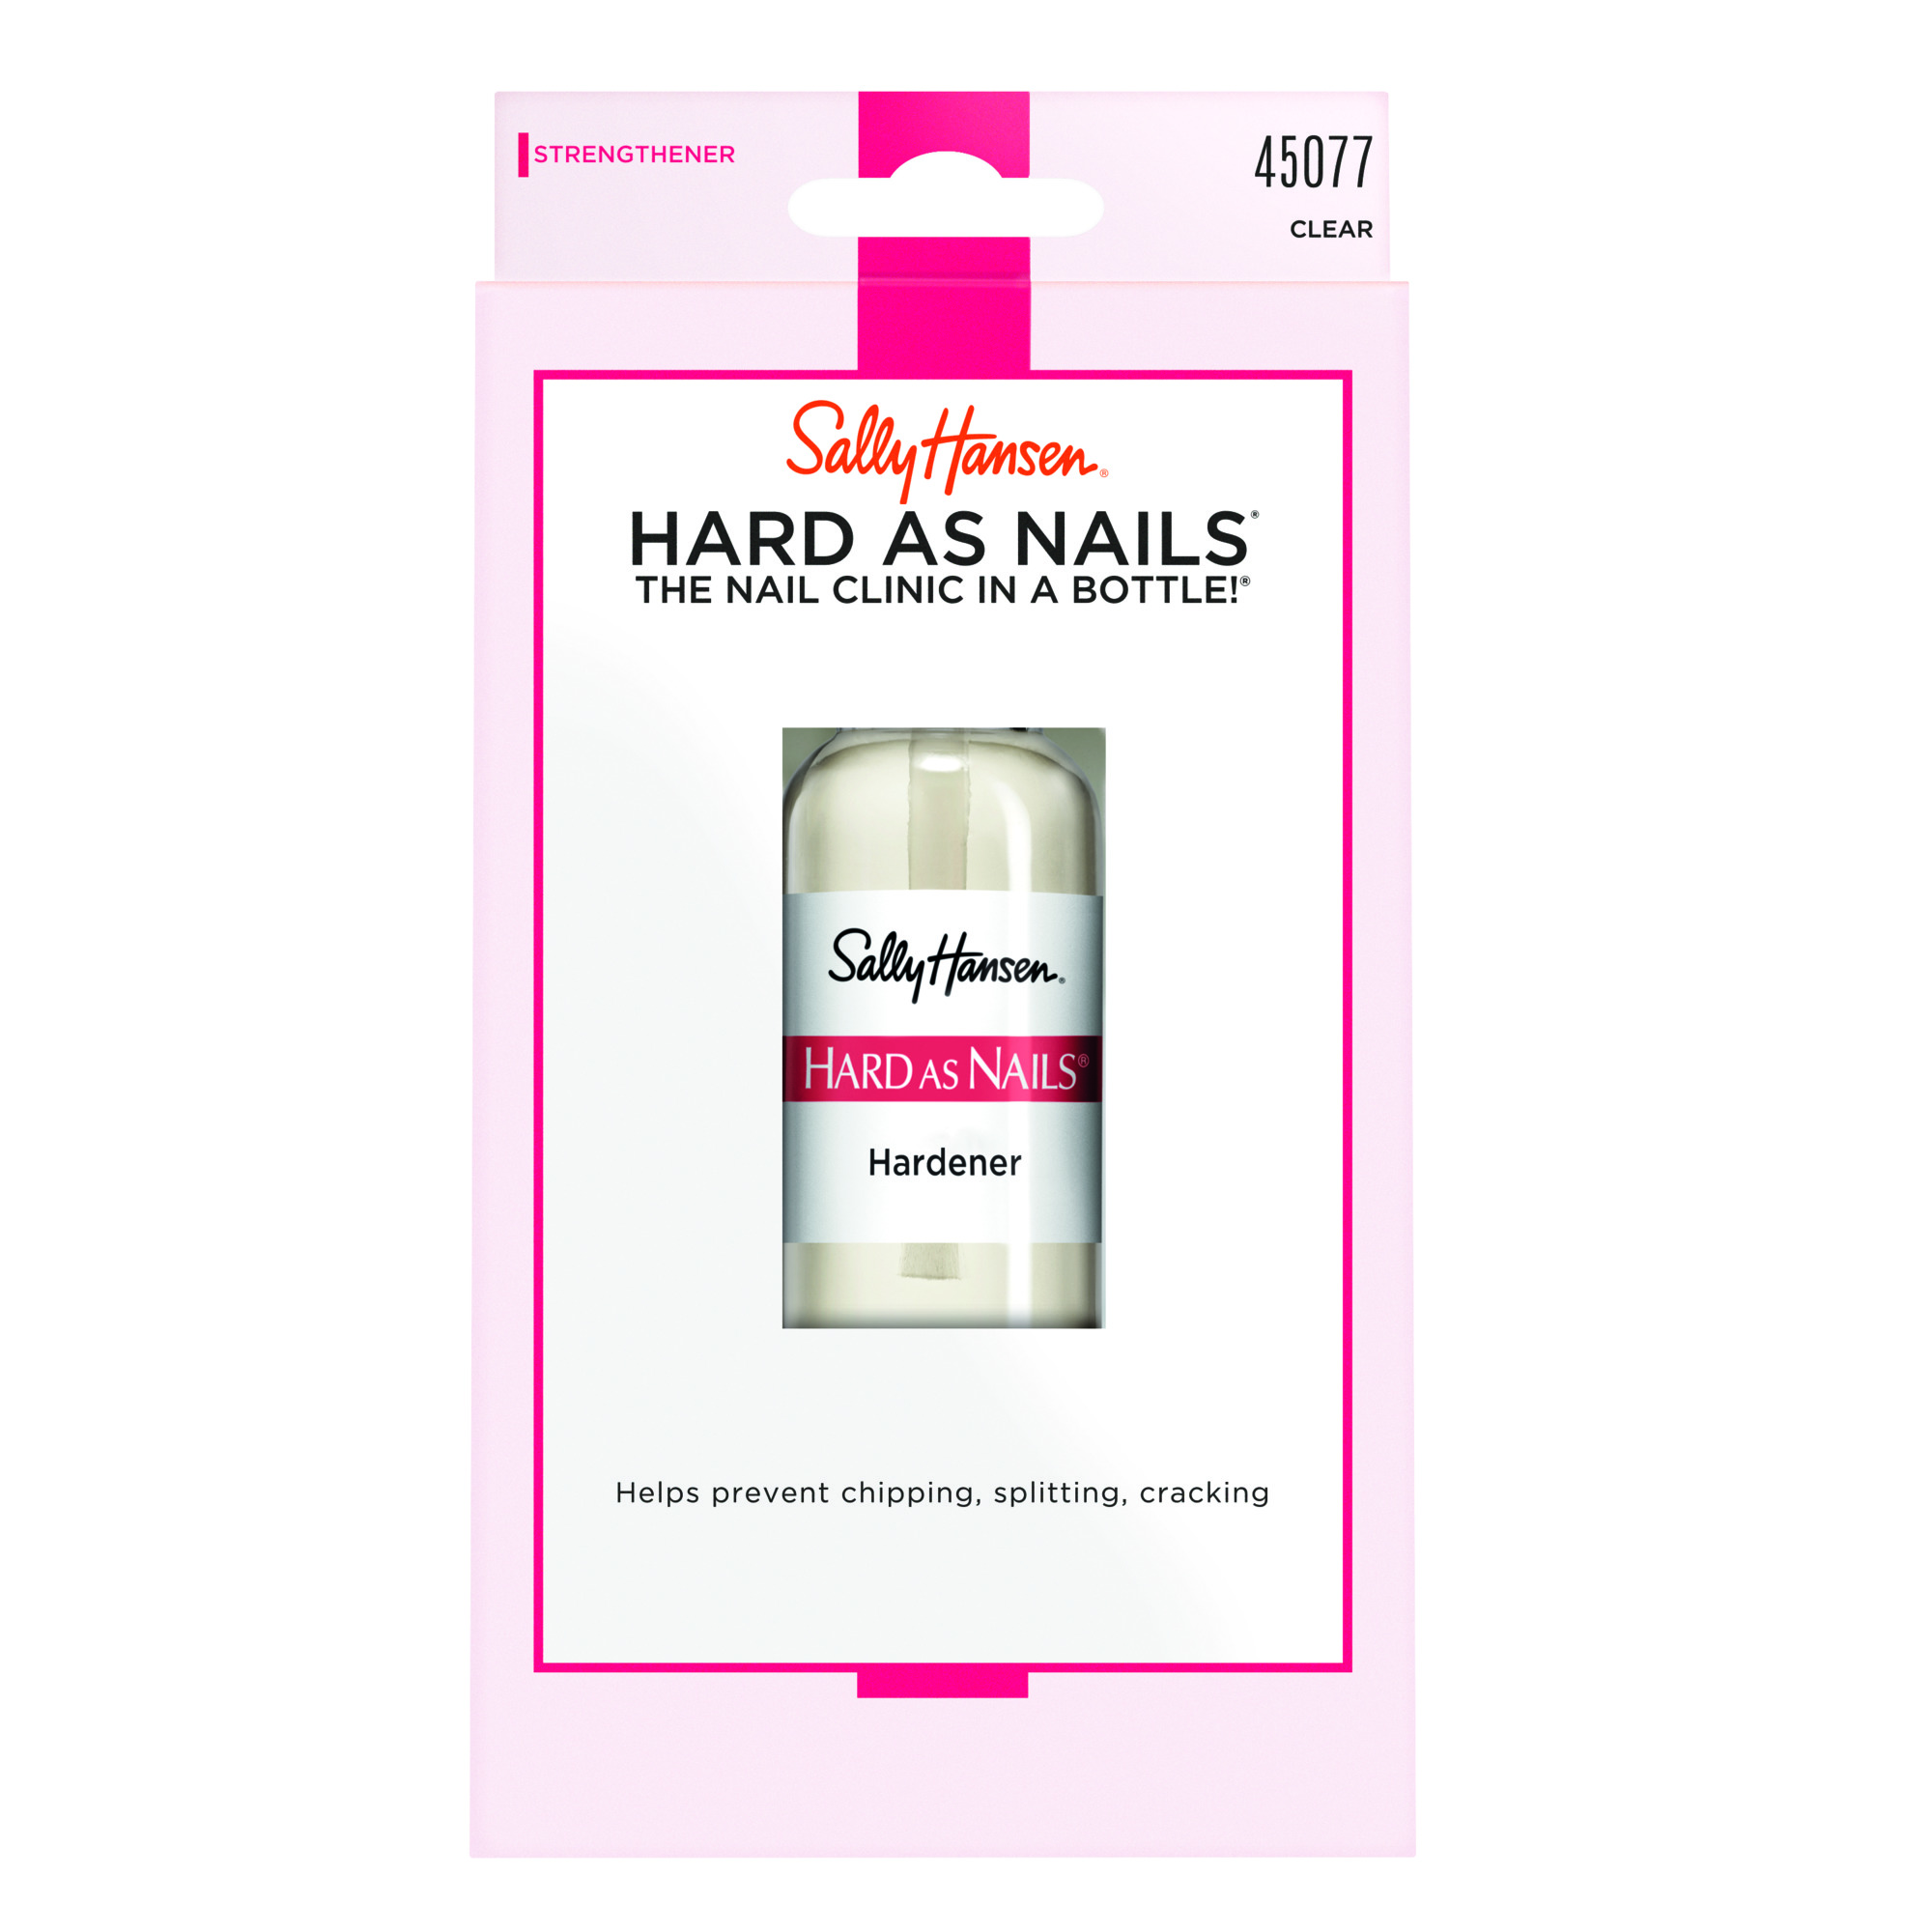 Sally Hansen Hard as Nails Strength Treatment - 45077 Clear Transparent 0.45 oz Nail Treatment - image 1 of 5